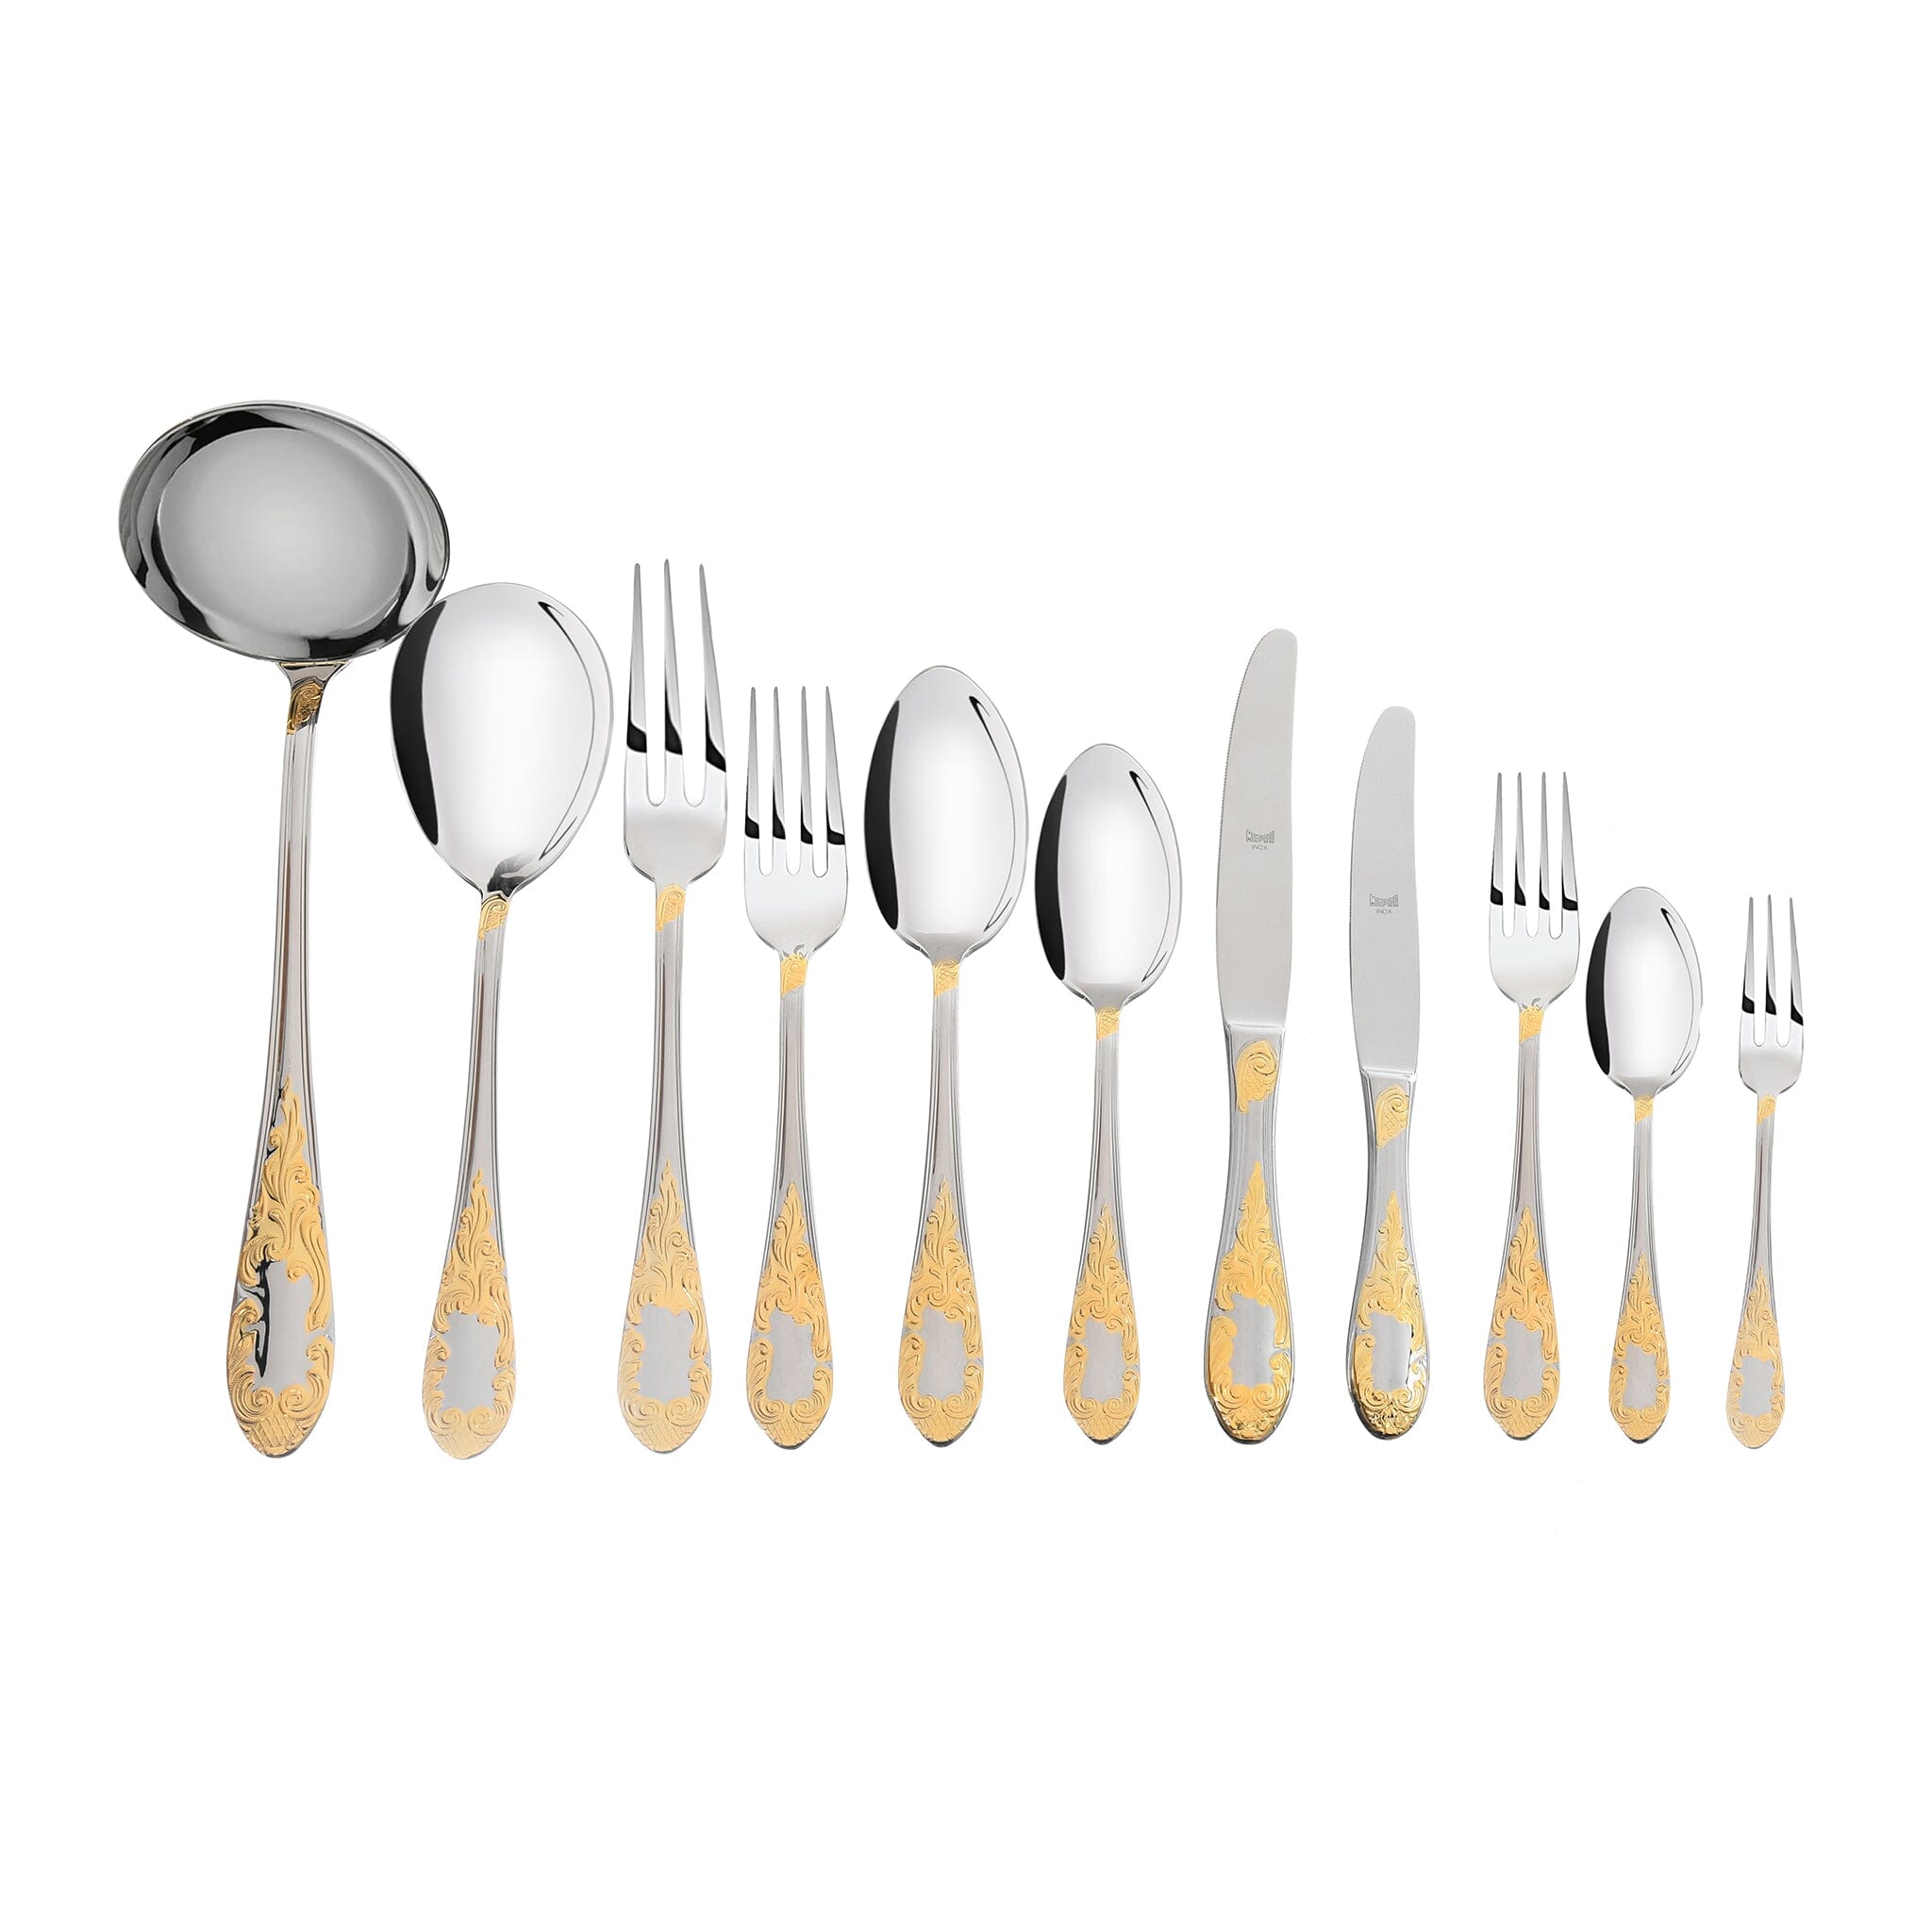 Mepra - Cutlery Set 99 Pieces - Stainless Steel 18/10 - Gold - Wooden Box - 100002122